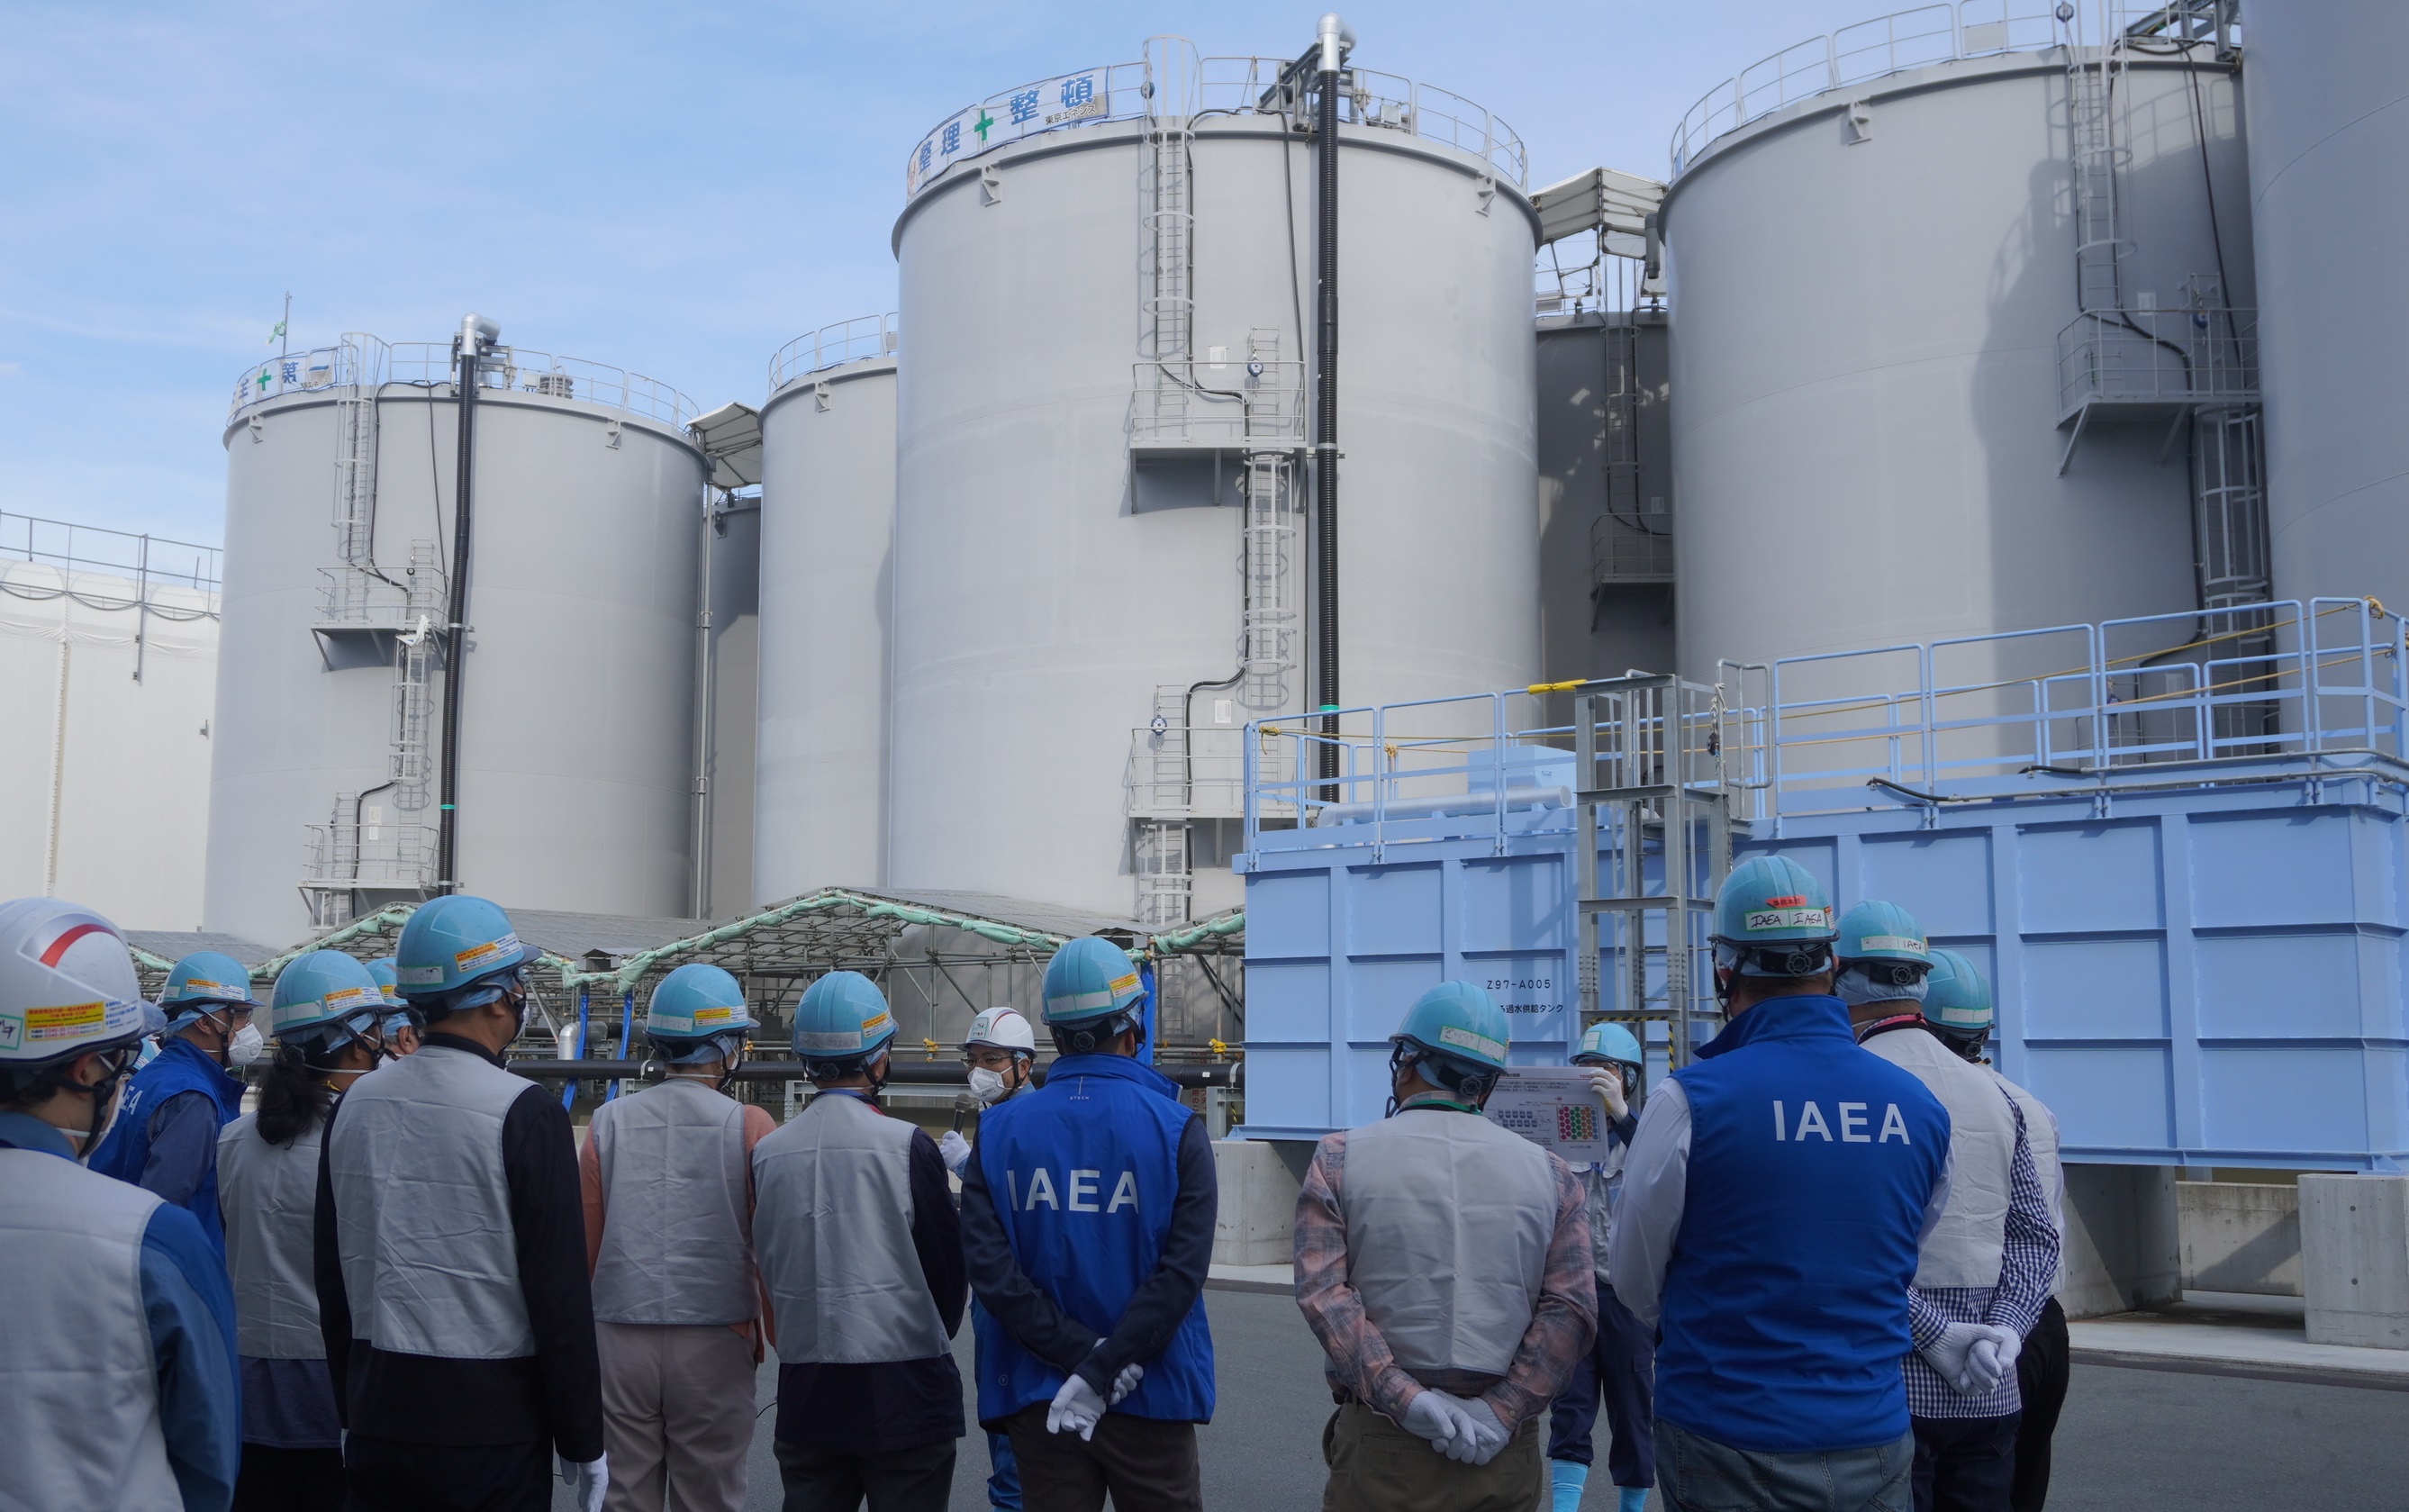 Site visit to the Fukushima Daiichi Nuclear Power Station by the IAEA Task Force to conduct a review mission regarding the discharge of ALPS treated water